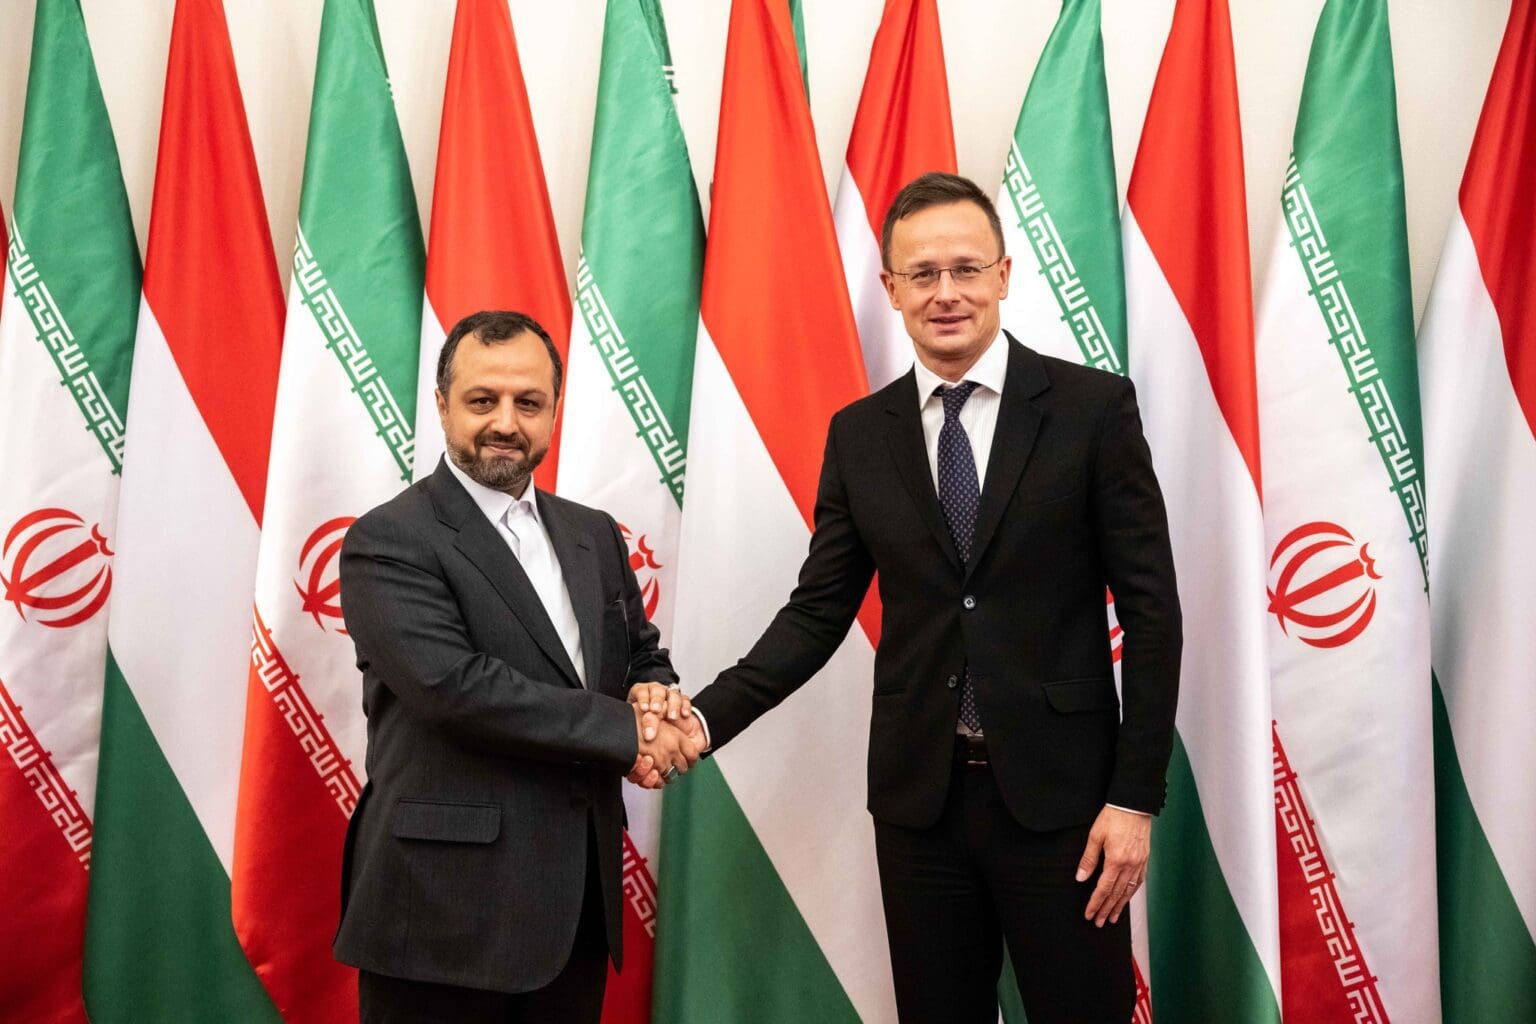 Foreign Minister: Hungary Supports the Iran Nuclear Agreement  